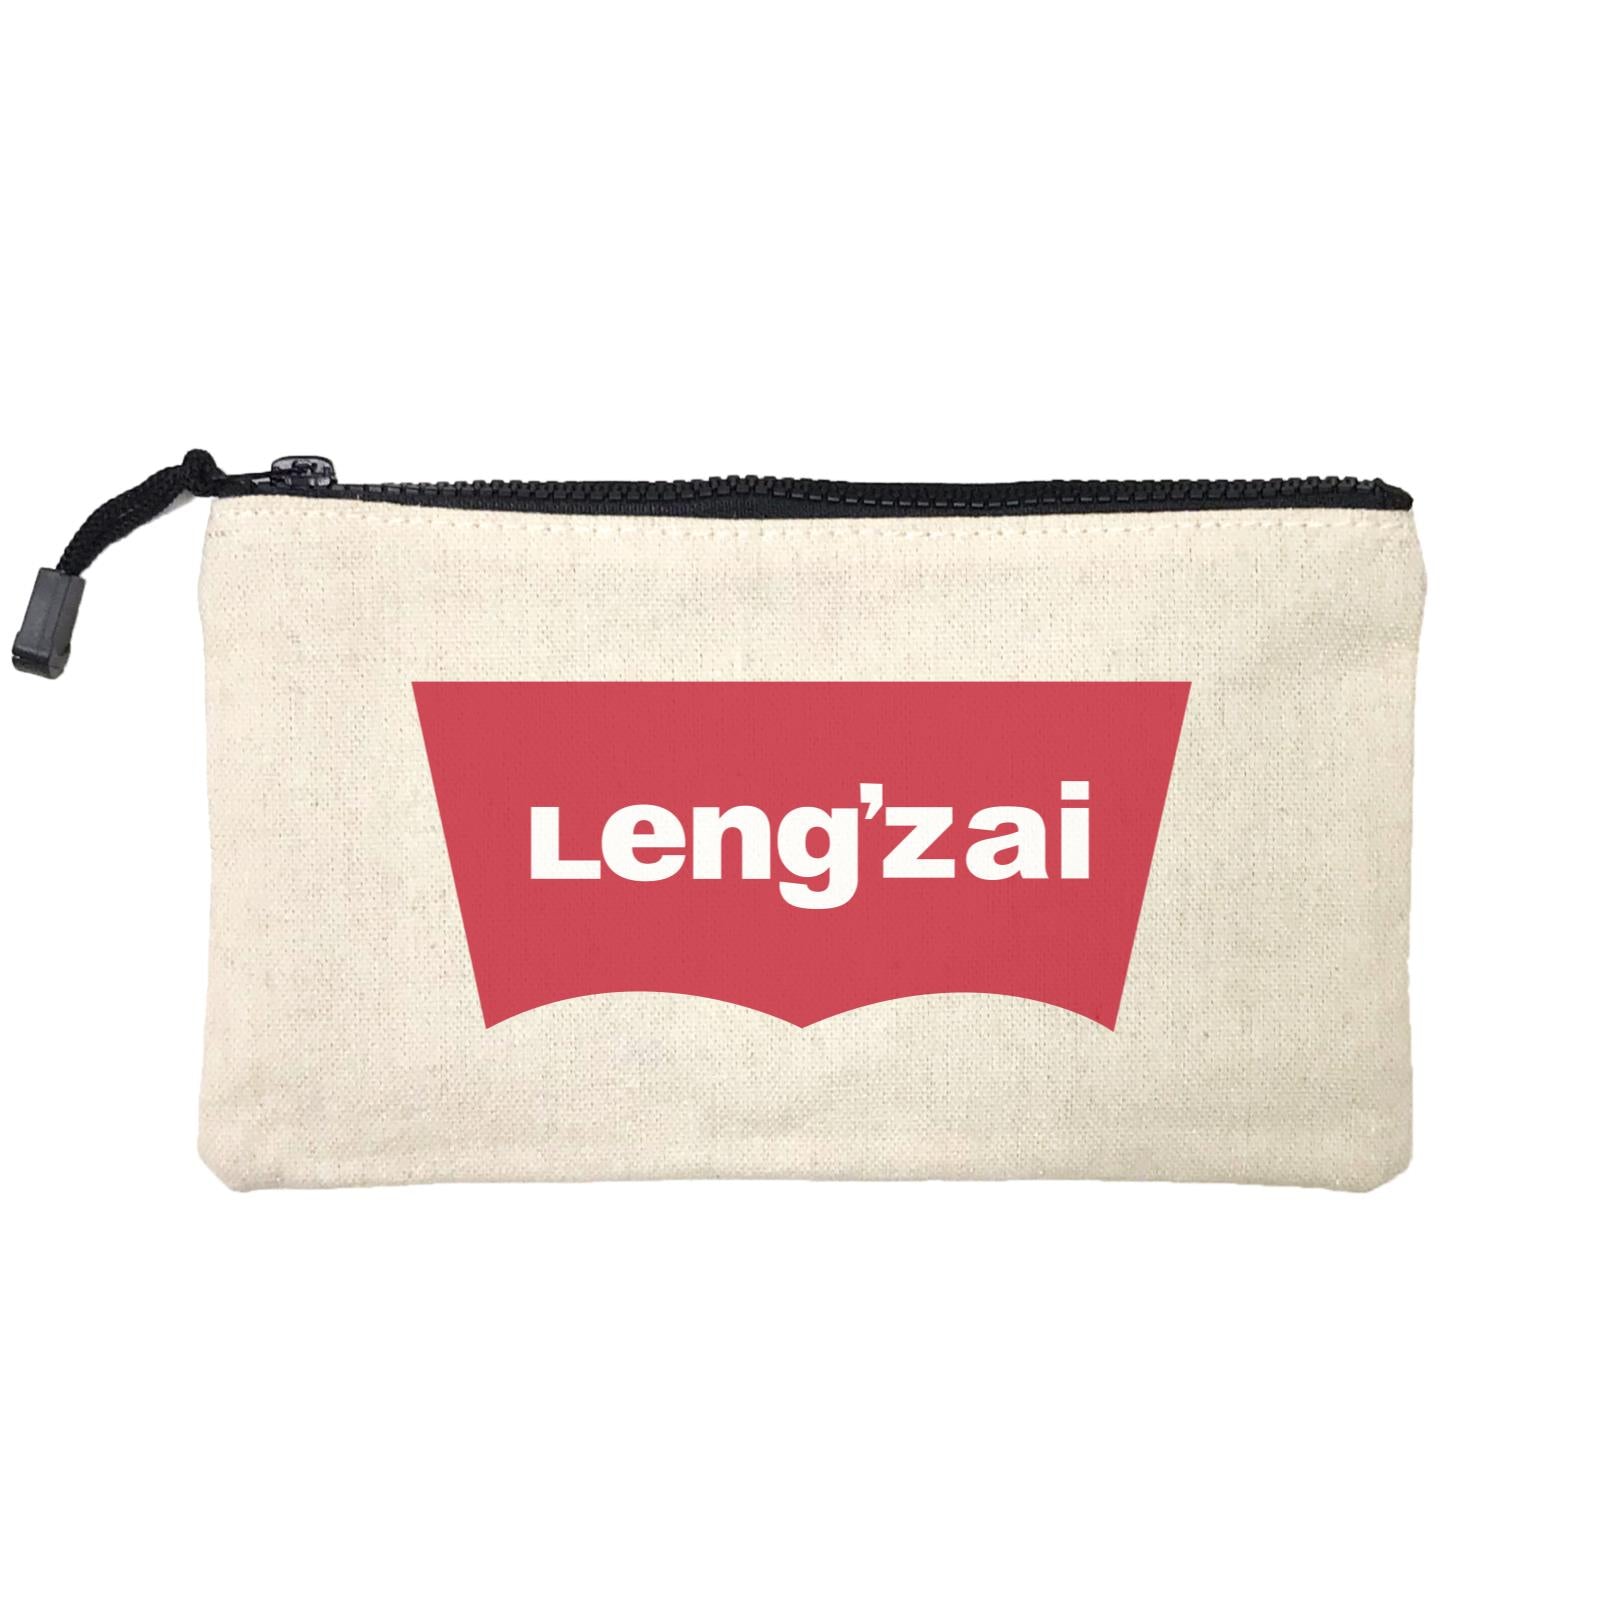 Slang Statement Lengzai SP  Stationery Pouch